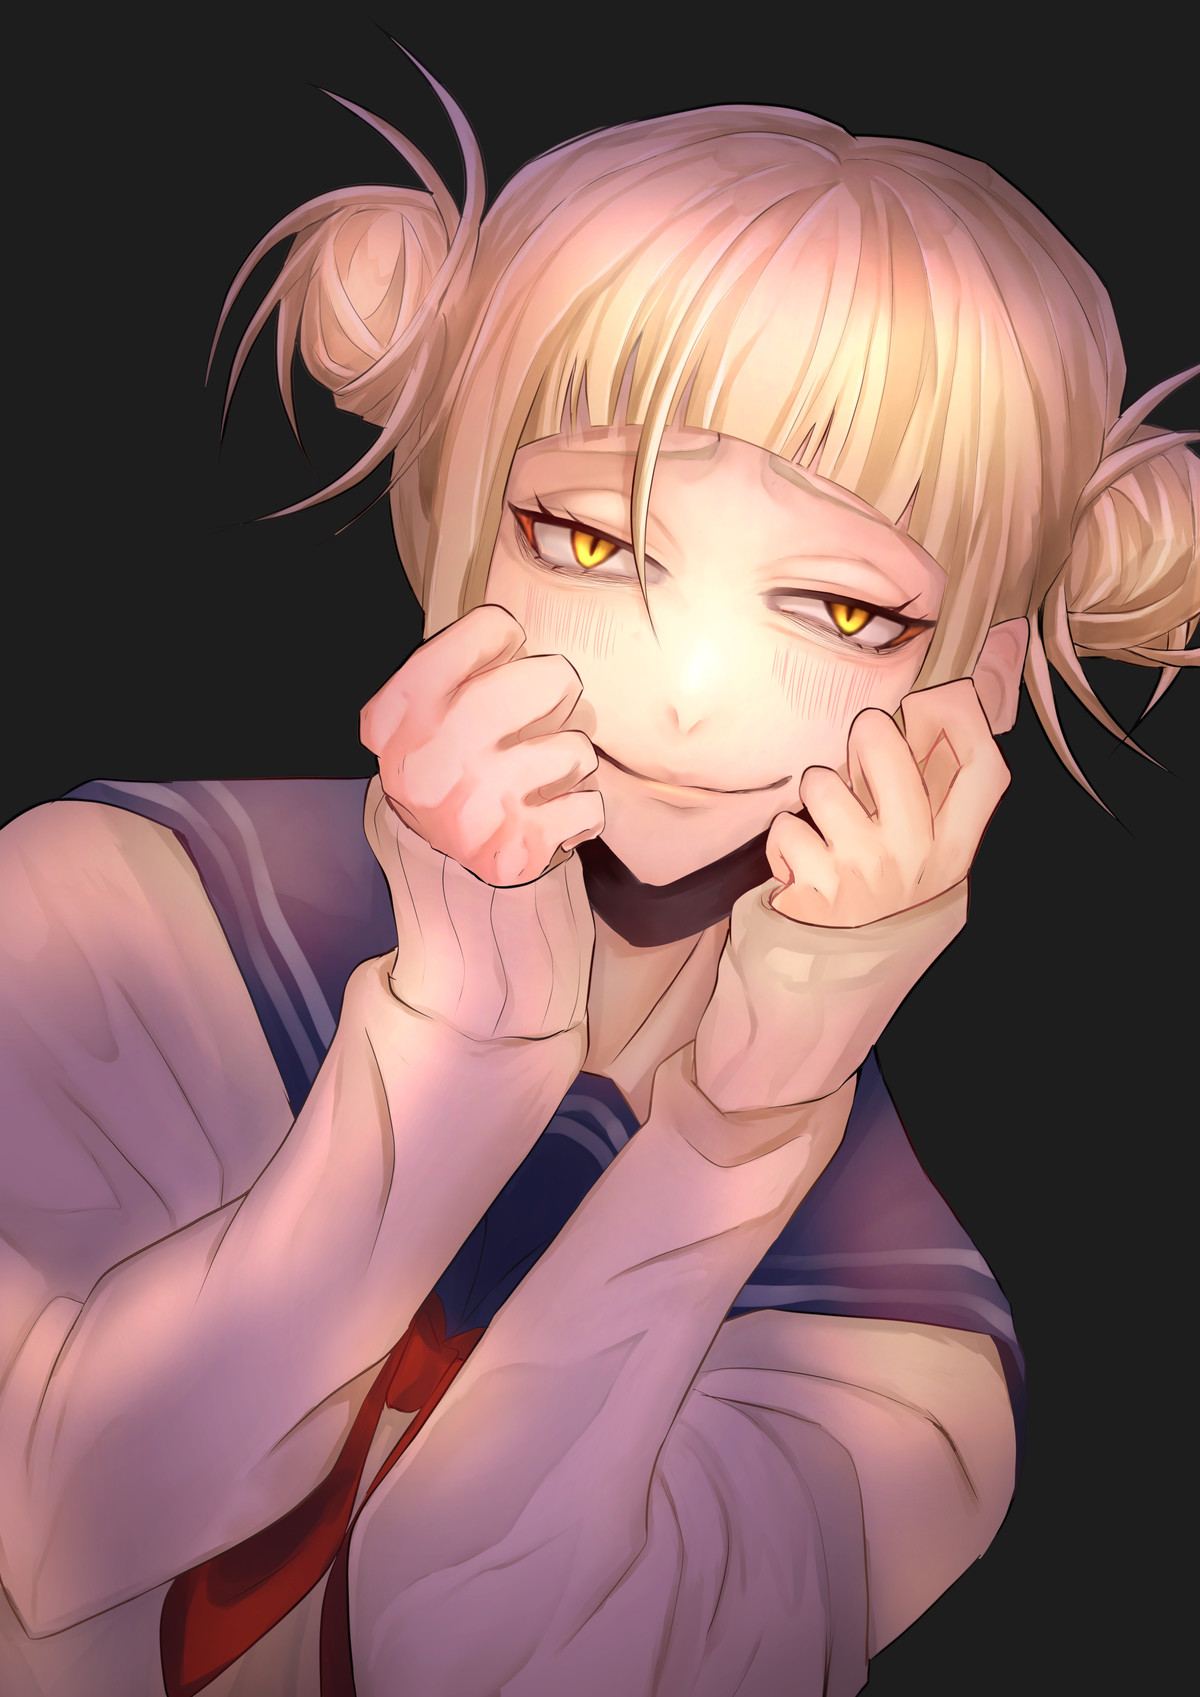 Daily Toga - 953: Cute Smile. join list: DailyToga (477 subs)Mention History Source: .